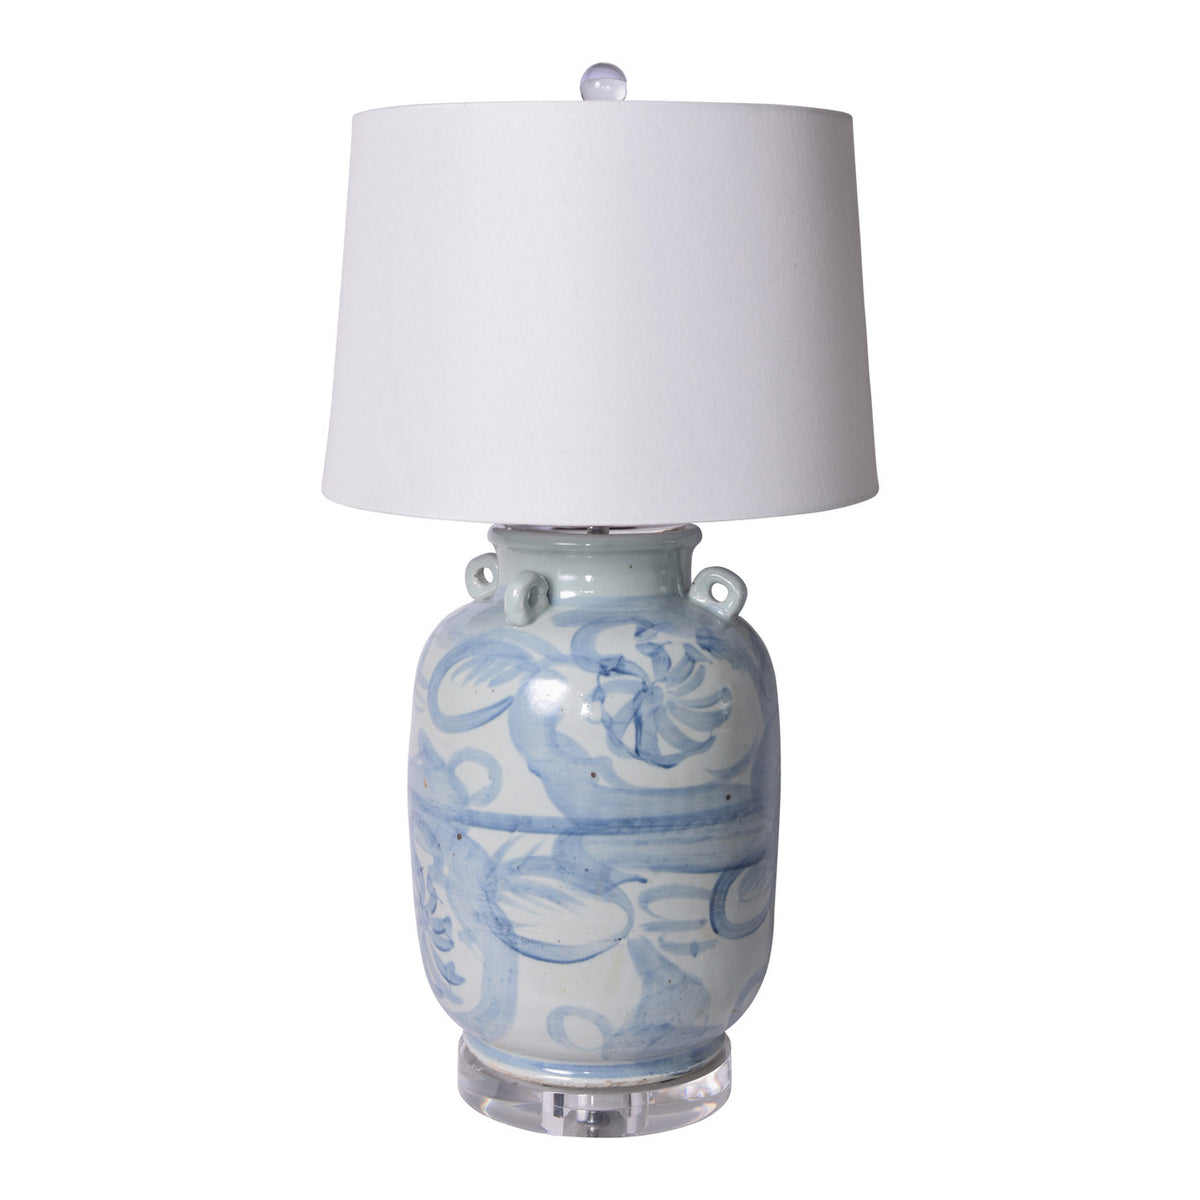 Legend of Asia chinoiserie lamp